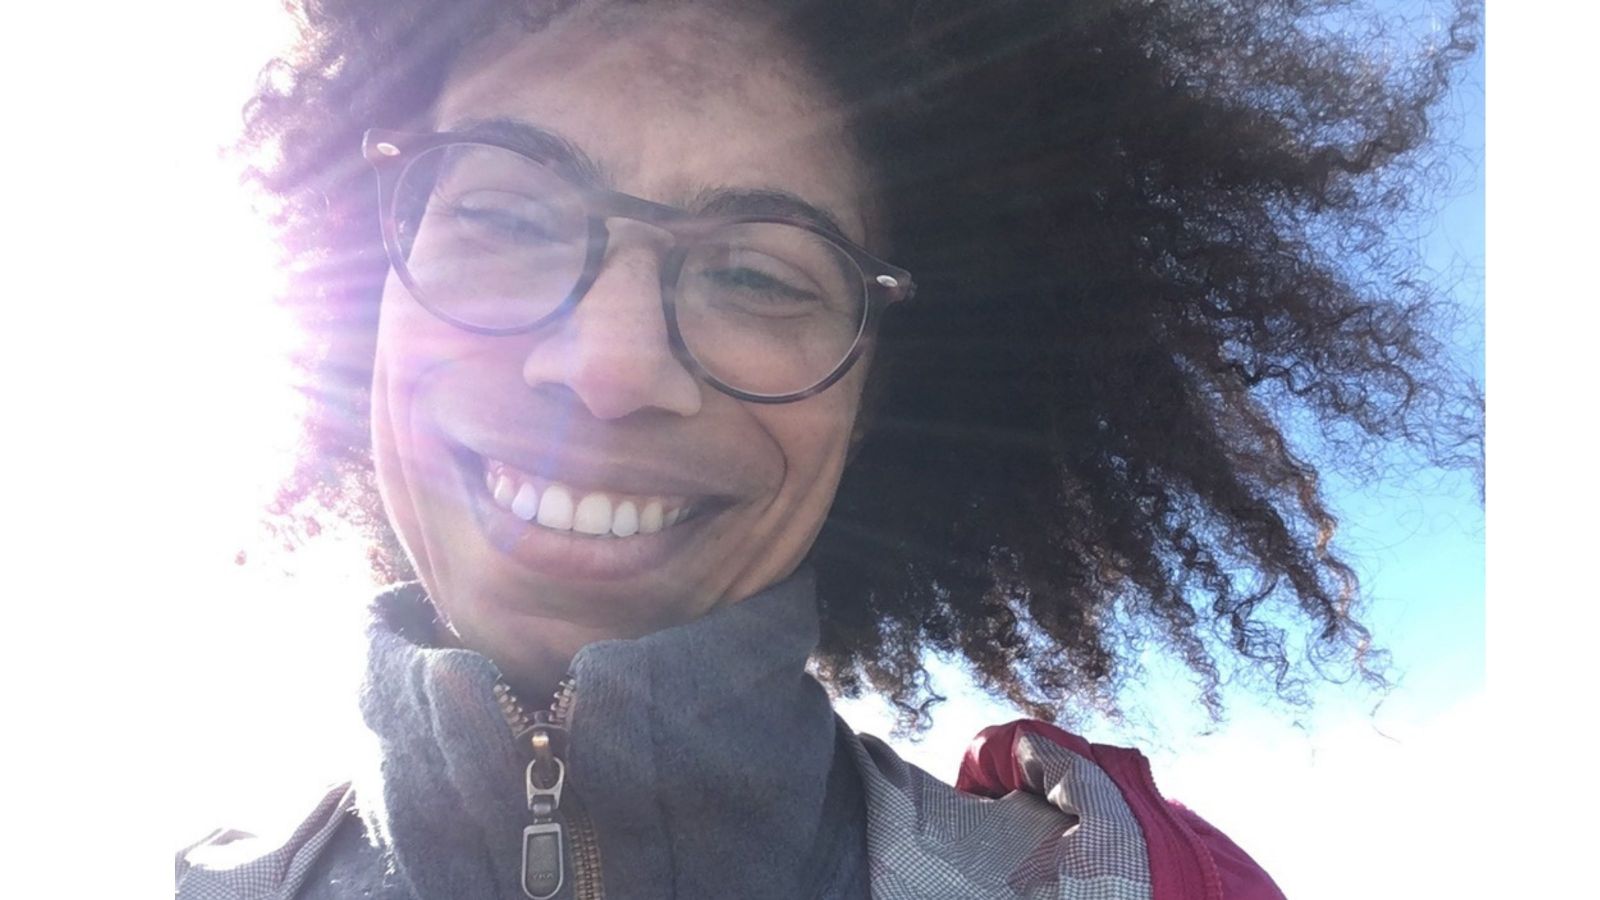 girl with curly dark hair flying smiling into camera with sun in background